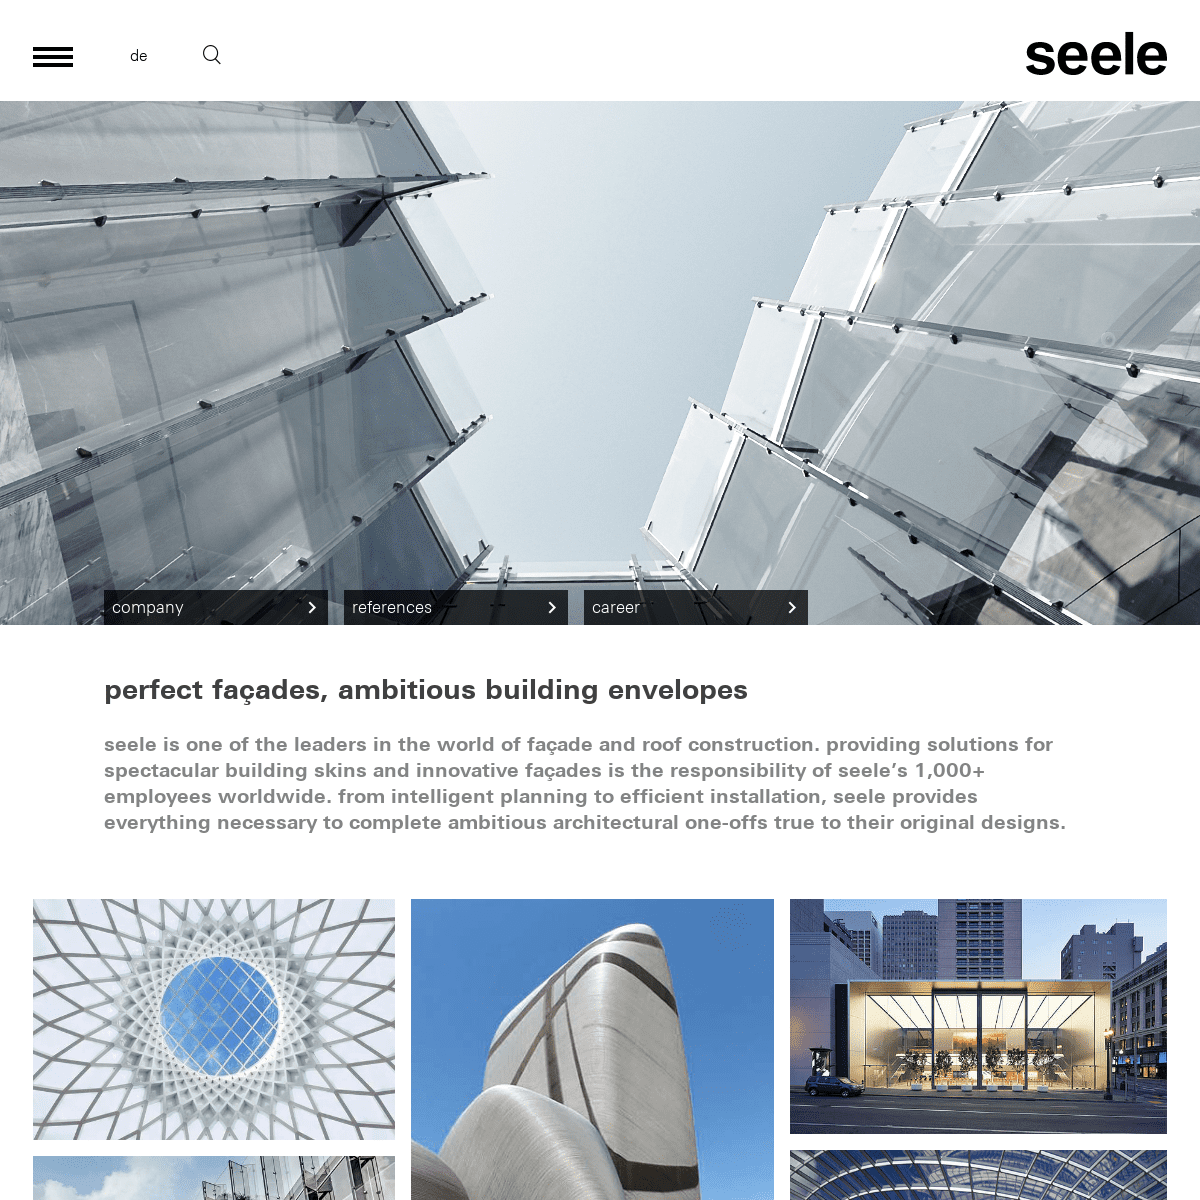 Excellence in façade constructions - seele